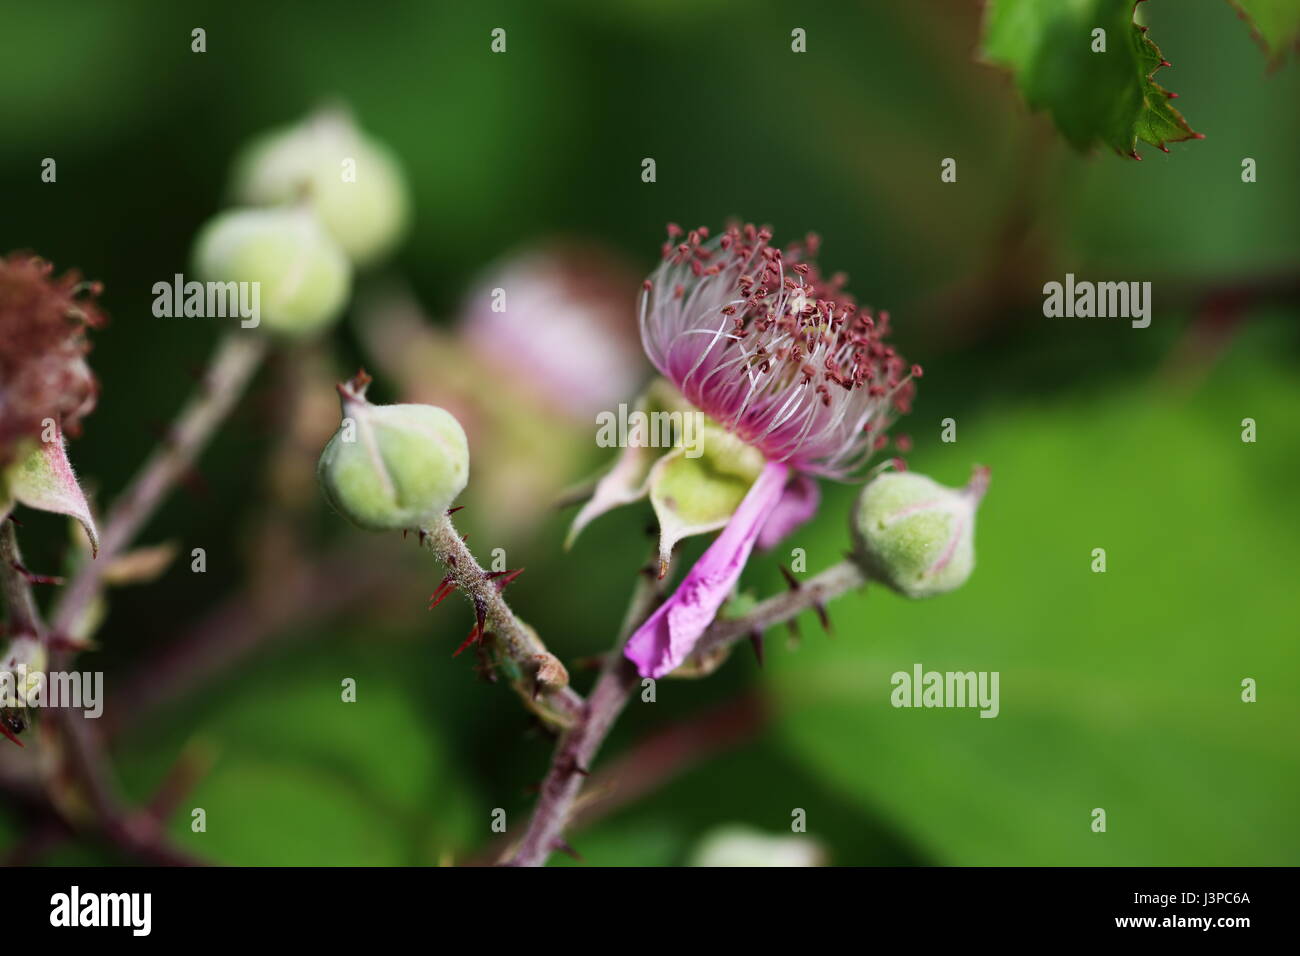 pink flower of blackberries with clear green buds on thorny stem with green background Stock Photo